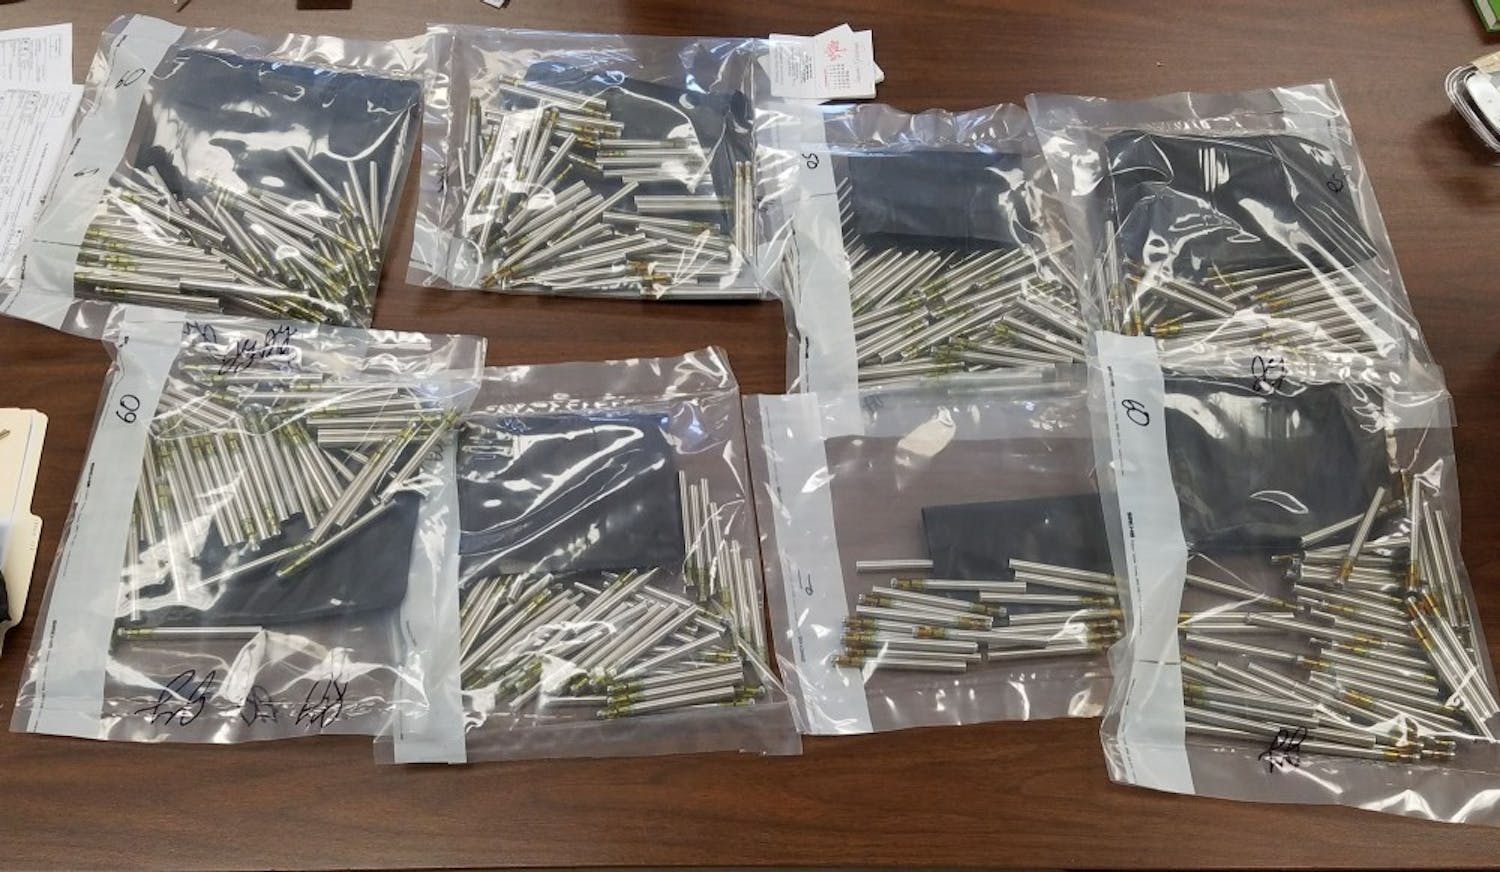 Vape pens filled with THC oil recovered by Auburn police on Jan. 3, 2018.